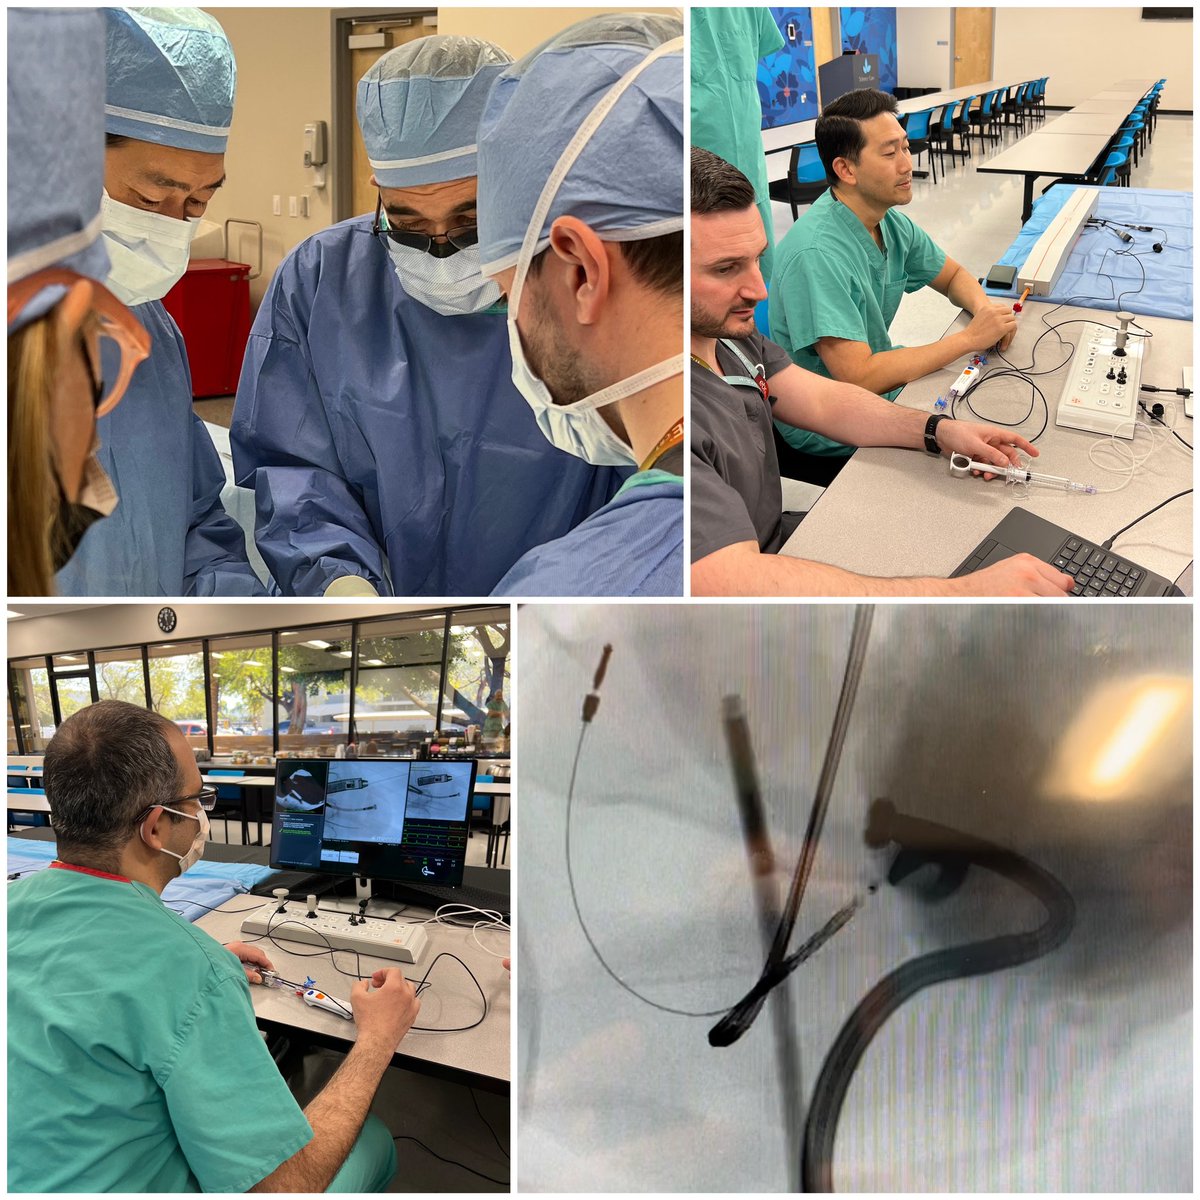 Thank you to @EBRSystemsInc for wonderful learning and training session with myself and @DrRoderickTung today on the WiSE Leadless CRT system. Looking forward to participating in SOLVE-CRT @uazmedphx @BannerHealth and future collaboration!